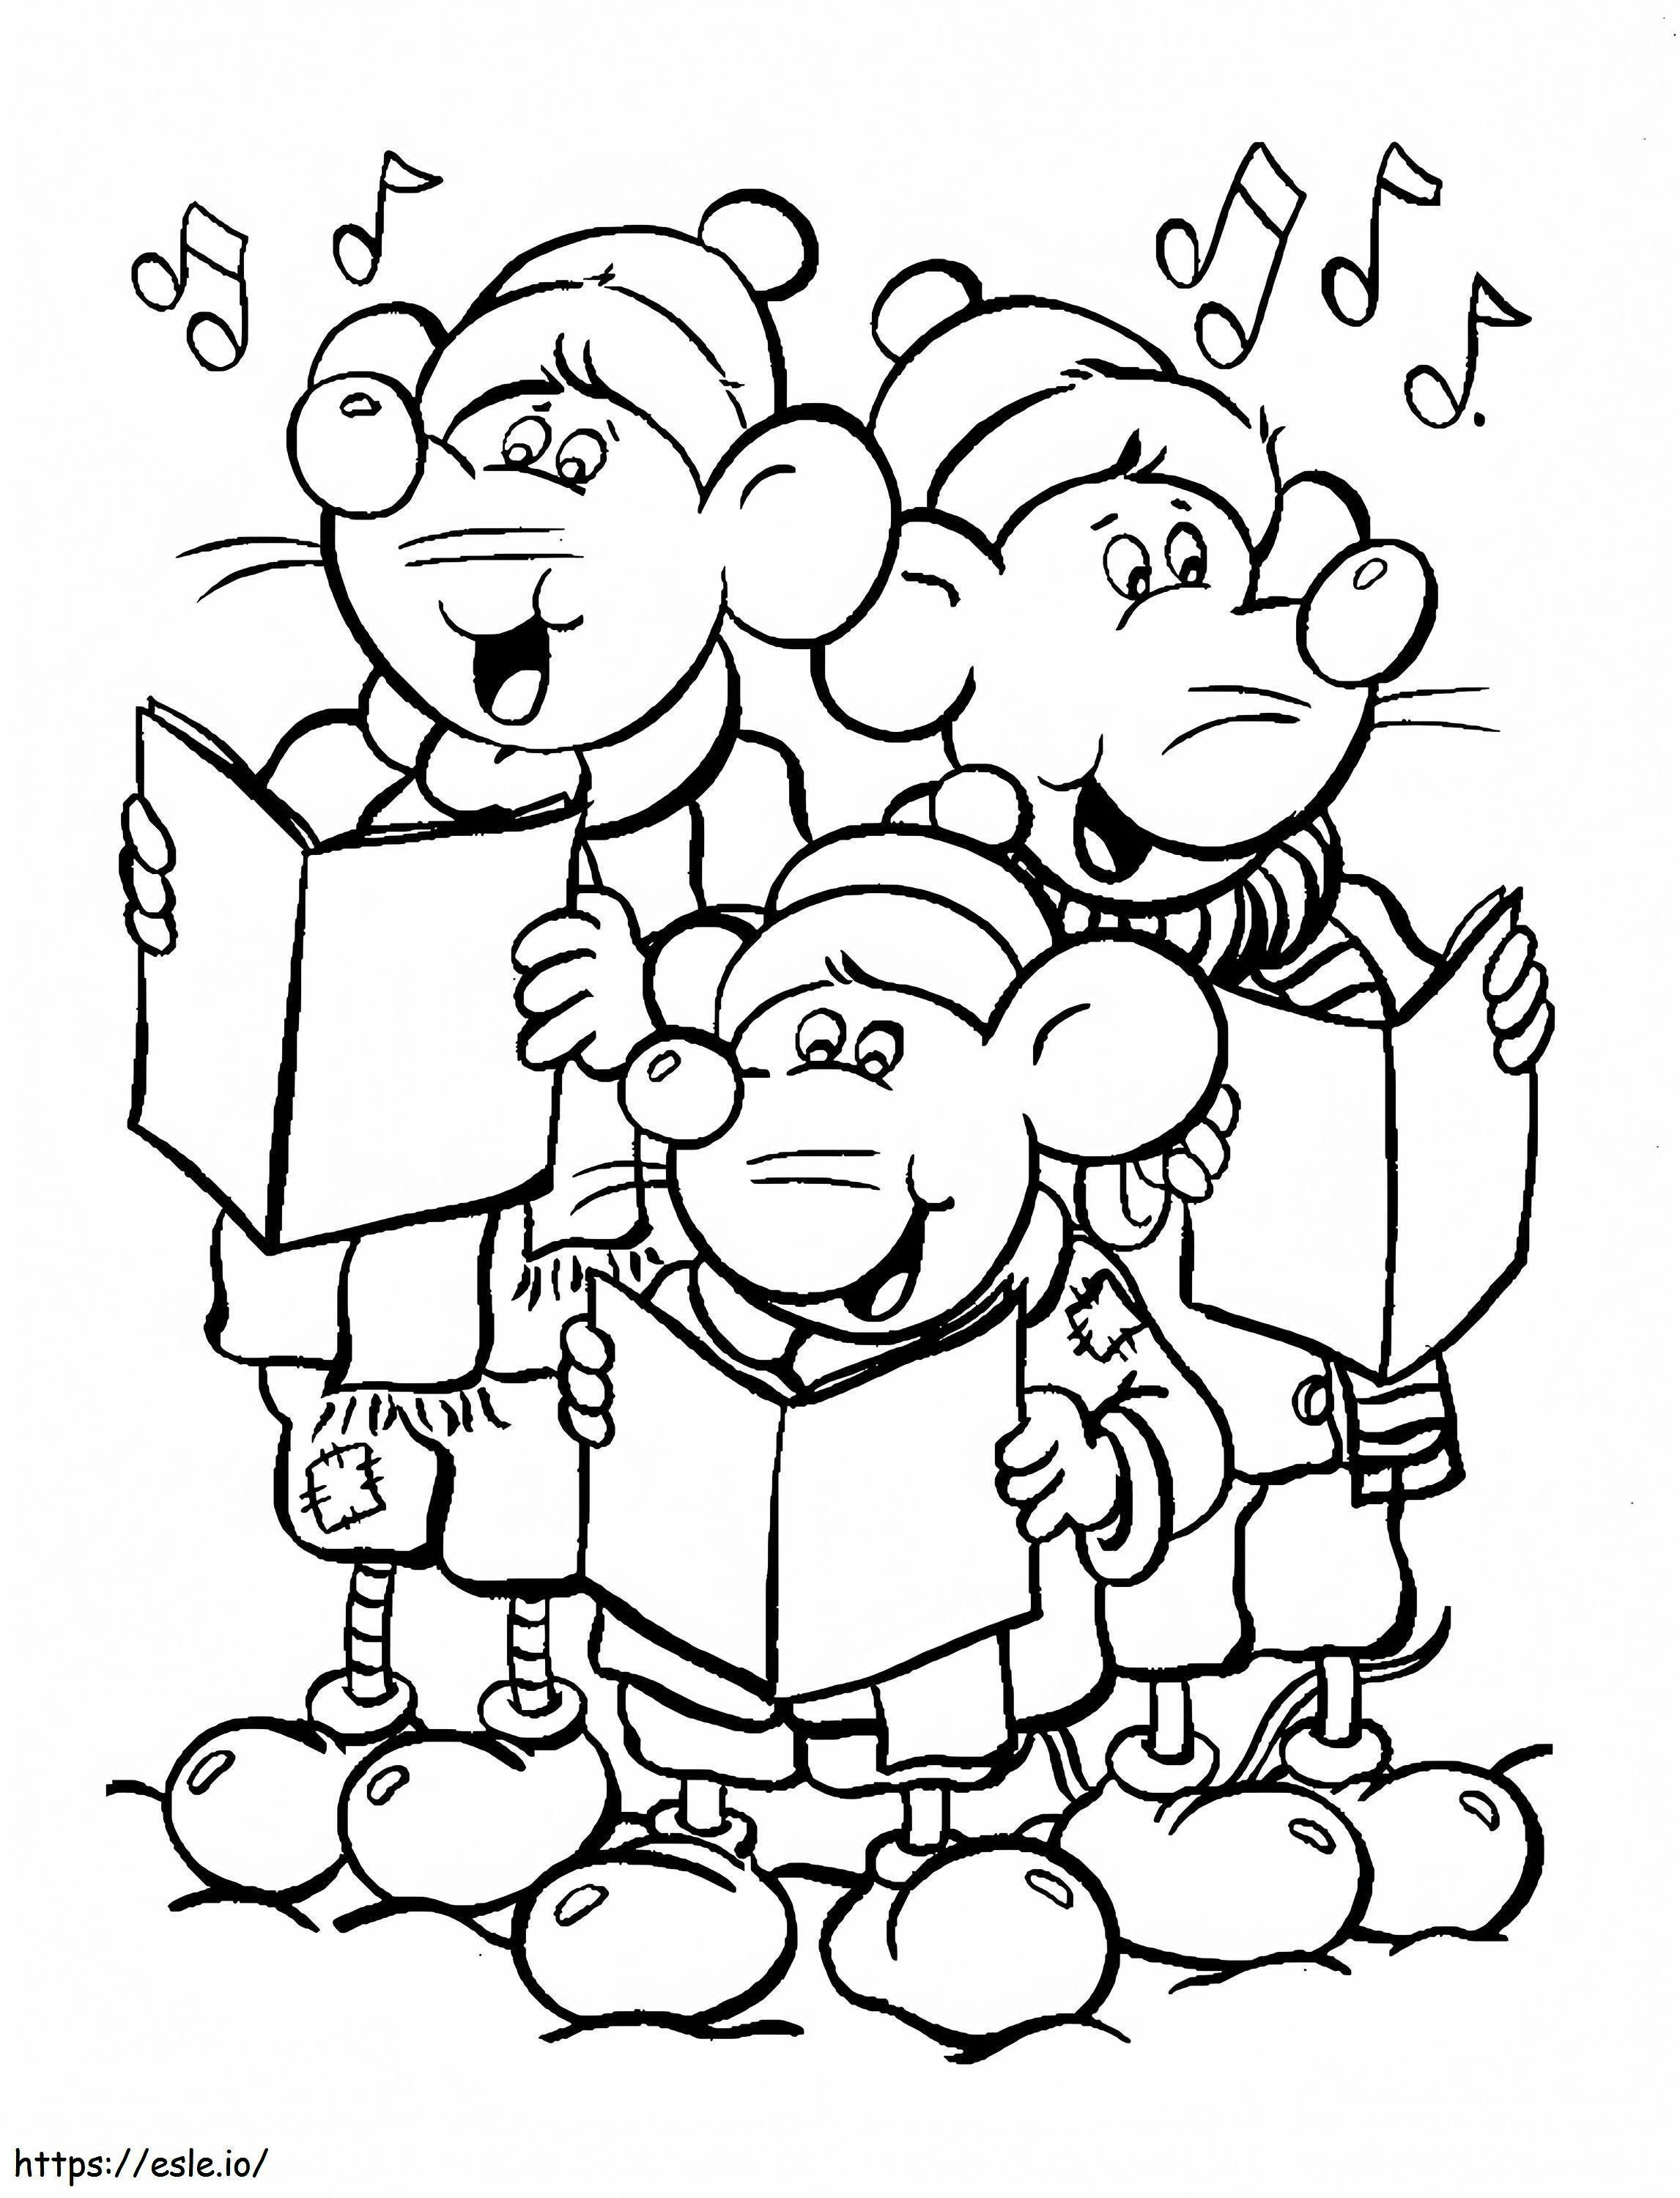 1545184103 Singing Christmas Songs coloring page